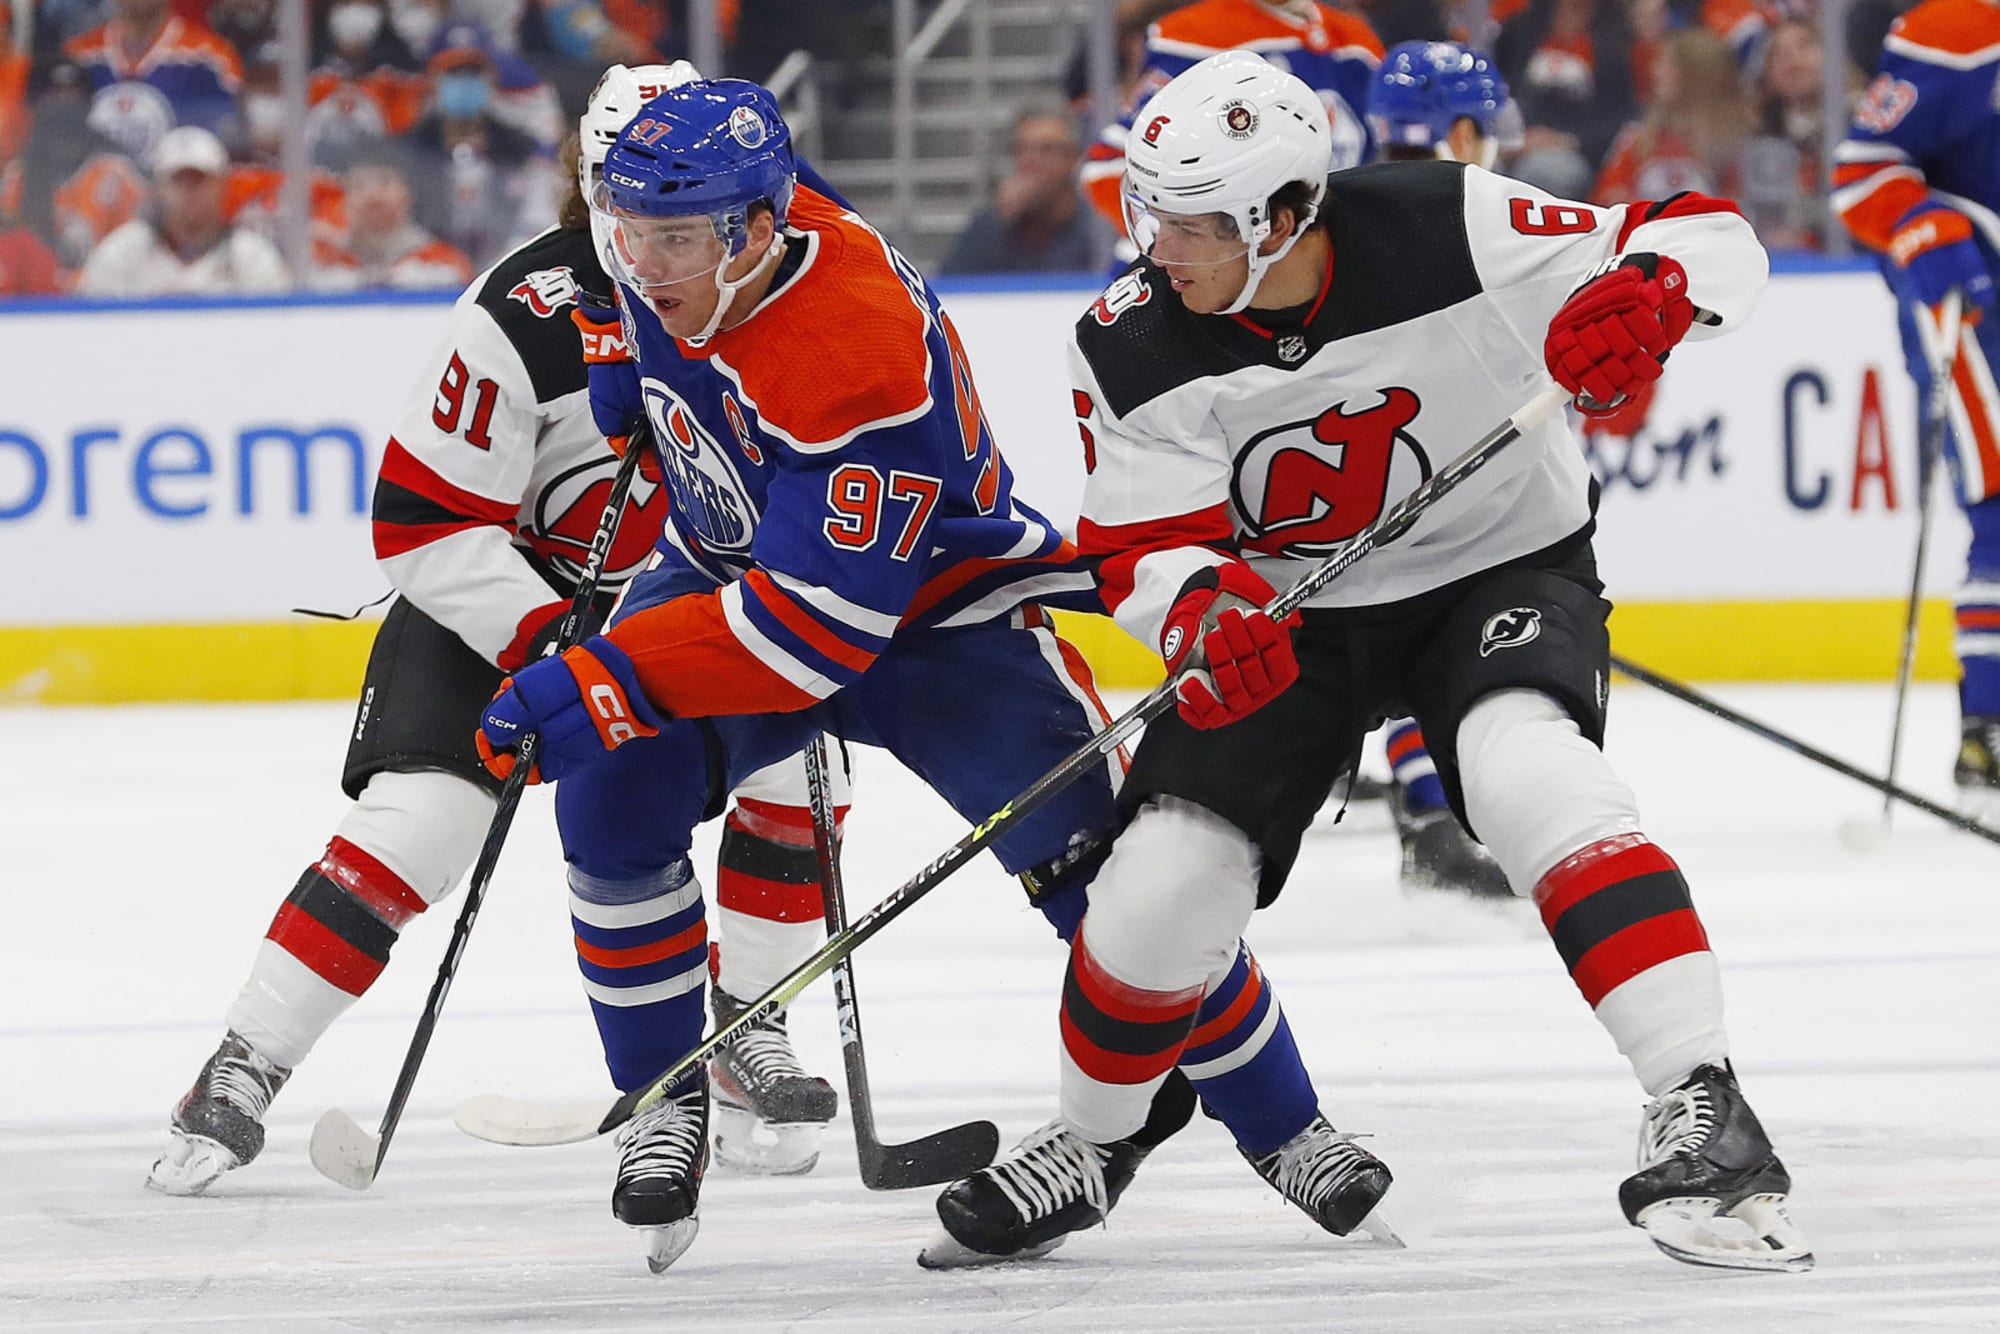 Oilers Vs Devils: Date, Time, Tv, Streaming, Betting Odds, More